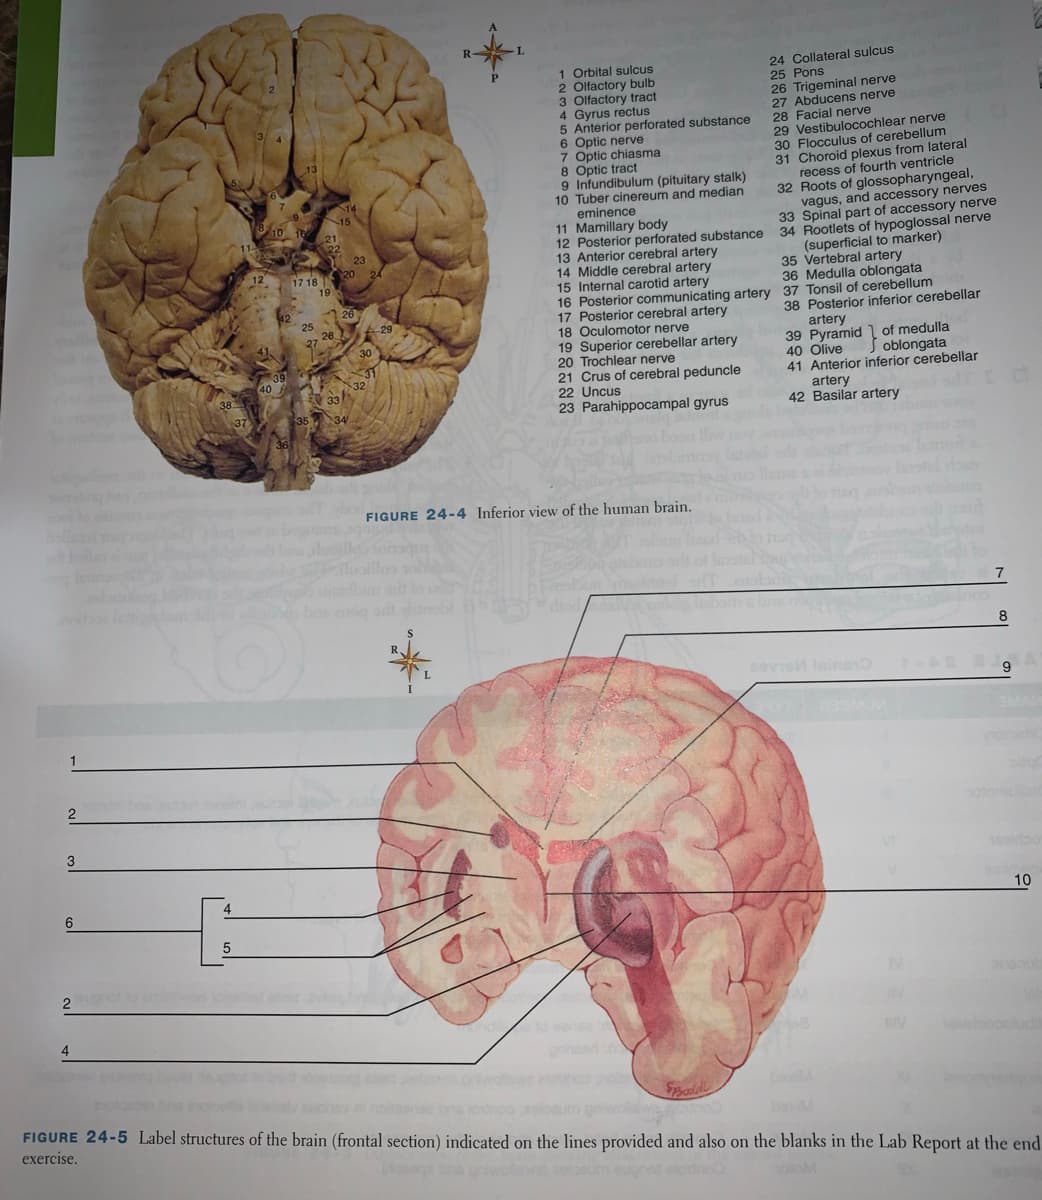 R
24 Collateral sulcus
25 Pons
26 Trigeminal nerve
27 Abducens nerve
28 Facial nerve
29 Vestibulocochlear nerve
30 Flocculus of cerebellum
31 Choroid plexus from lateral
recess of fourth ventricle
32 Roots of glossopharyngeal,
vagus, and accessory nerves
33 Spinal part of accessory nerve
1 Orbital sulcus
2 Olfactory bulb
3 Olfactory tract
4 Gyrus rectus
5 Anterior perforated substance
6 Optic nerve
7 Optic chiasma
8 Optic tract
9 Infundibulum (pituitary stalk)
10 Tuber cinereum and median
eminence
11 Mamillary body
12 Posterior perforated substance 34 Rootlets of hypoglossal nerve
13 Anterior cerebral artery
14 Middle cerebral artery
15 Internal carotid artery
16 Posterior communicating artery 37 Tonsil of cerebellum
17 Posterior cerebral artery
18 Oculomotor nerve
19 Superior cerebellar artery
20 Trochlear nerve
21 Crus of cerebral peduncle
22 Uncus
23 Parahippocampal gyrus
15
10
23
(superficial to marker)
35 Vertebral artery
36 Medulla oblongata
12
20
17 18
19
38 Posterior inferior cerebellar
artery
39 Pyramid 1 of medulla
40 Olive
41 Anterior inferior cerebellar
artery
42 Basilar artery
25
26.
27
30
J oblongata
40
32
V 33
35
FIGURE 24-4 Inferior view of the human brain.
8.
1
2
3
10
2
eow oh
4
Spala
FIGURE 24-5 Label structures of the brain (frontal section) indicated on the lines provided and also on the blanks in the Lab Report at the end
beM
exercise.
